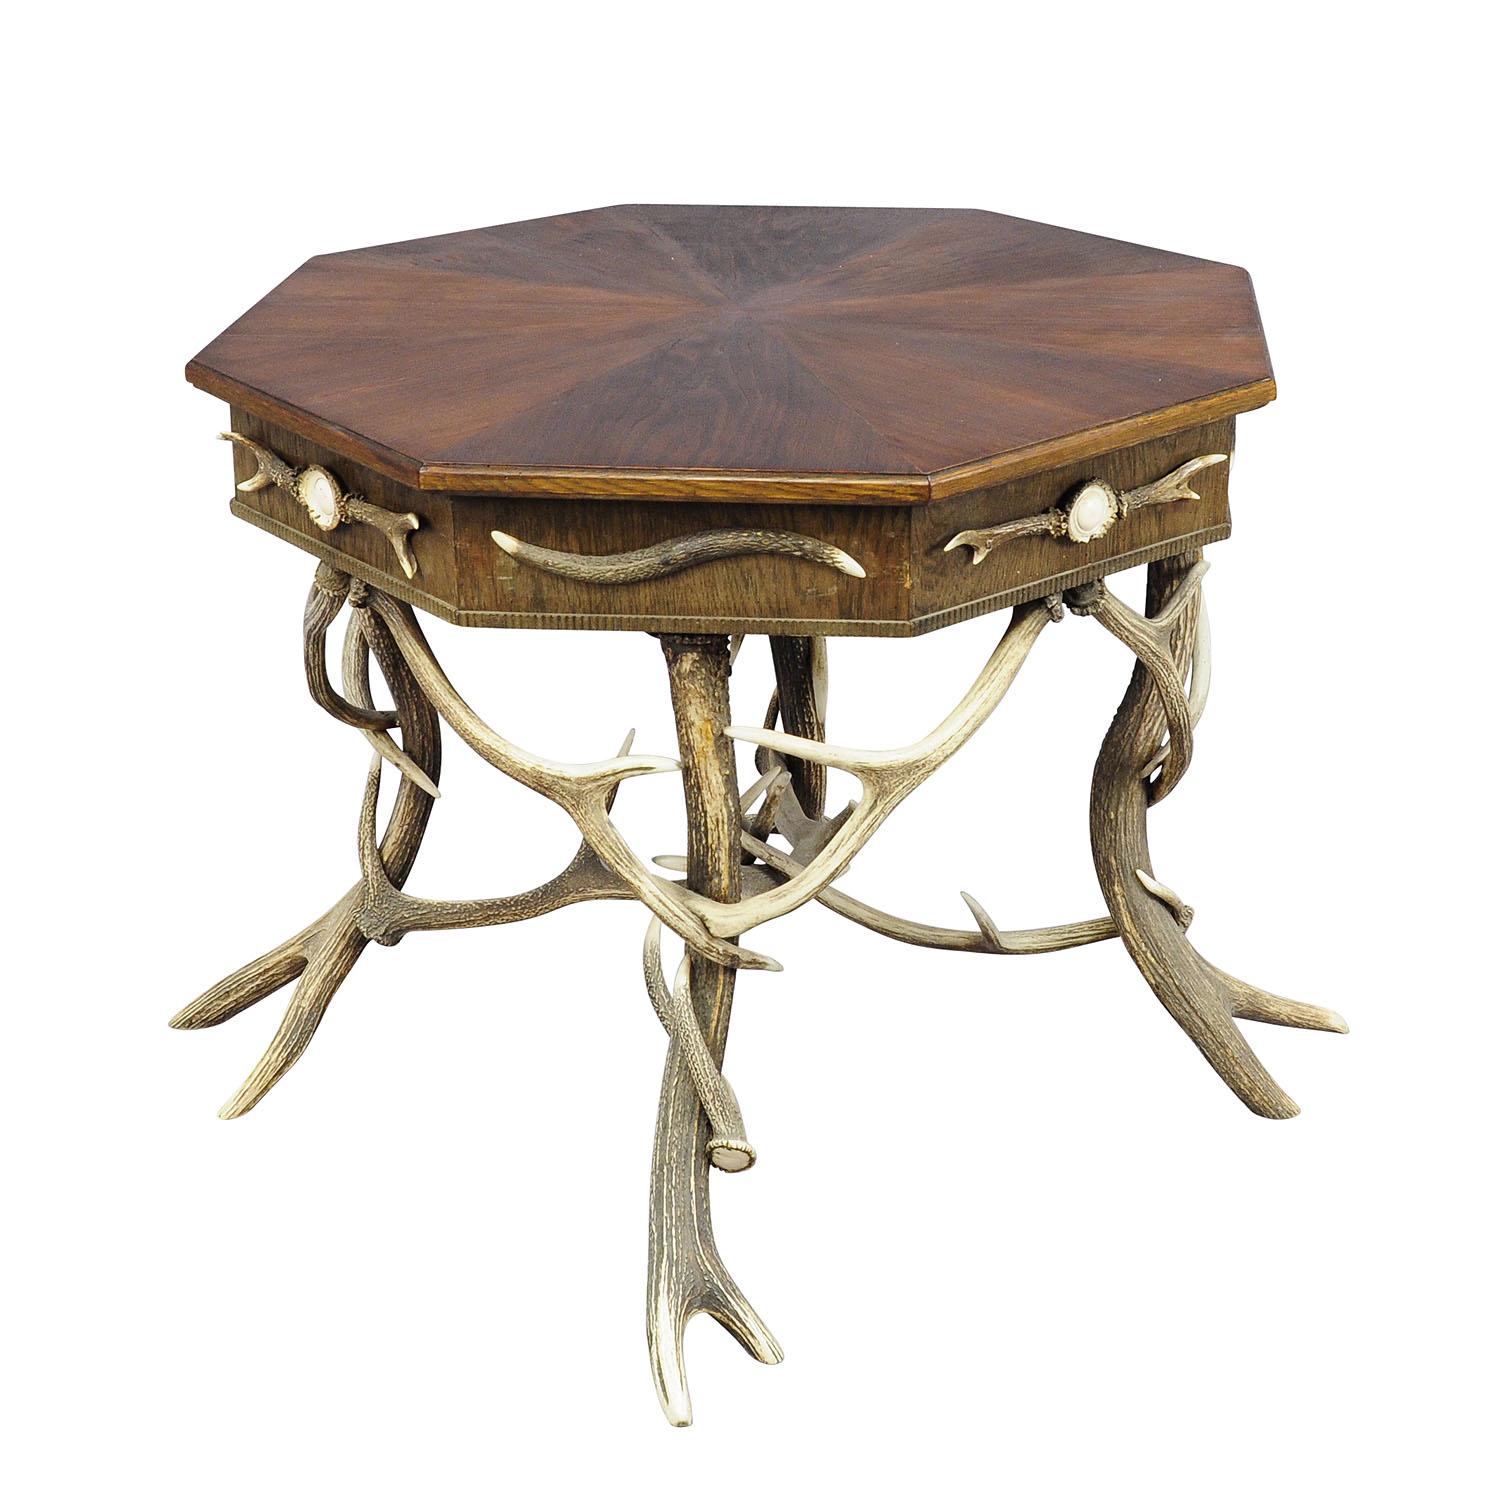 Antique Black Forest rustic antler table ca. 1900.

A large antique octagonal antler table. Decorated with several antlers from the deer and stag. Each corner with turned horn roses. Restored walnut top with carved border. executed n Germany around